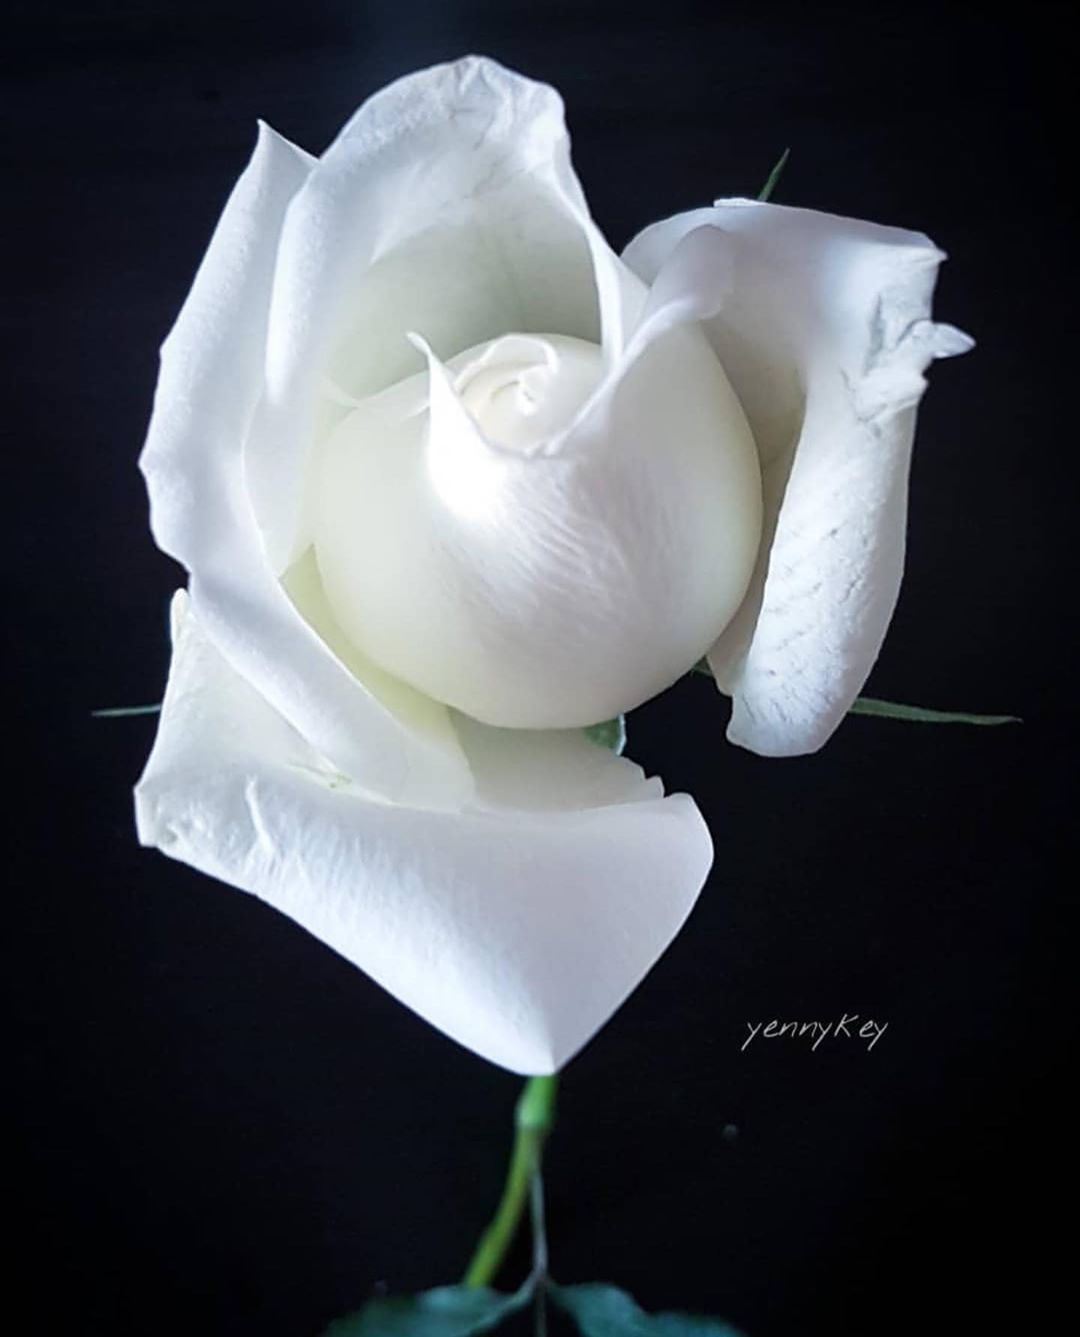 Pictures of white roses - Pictures of white roses - Rose flower pictures download - Rose flower pictures of different colors - rose flower - NeotericIT.com